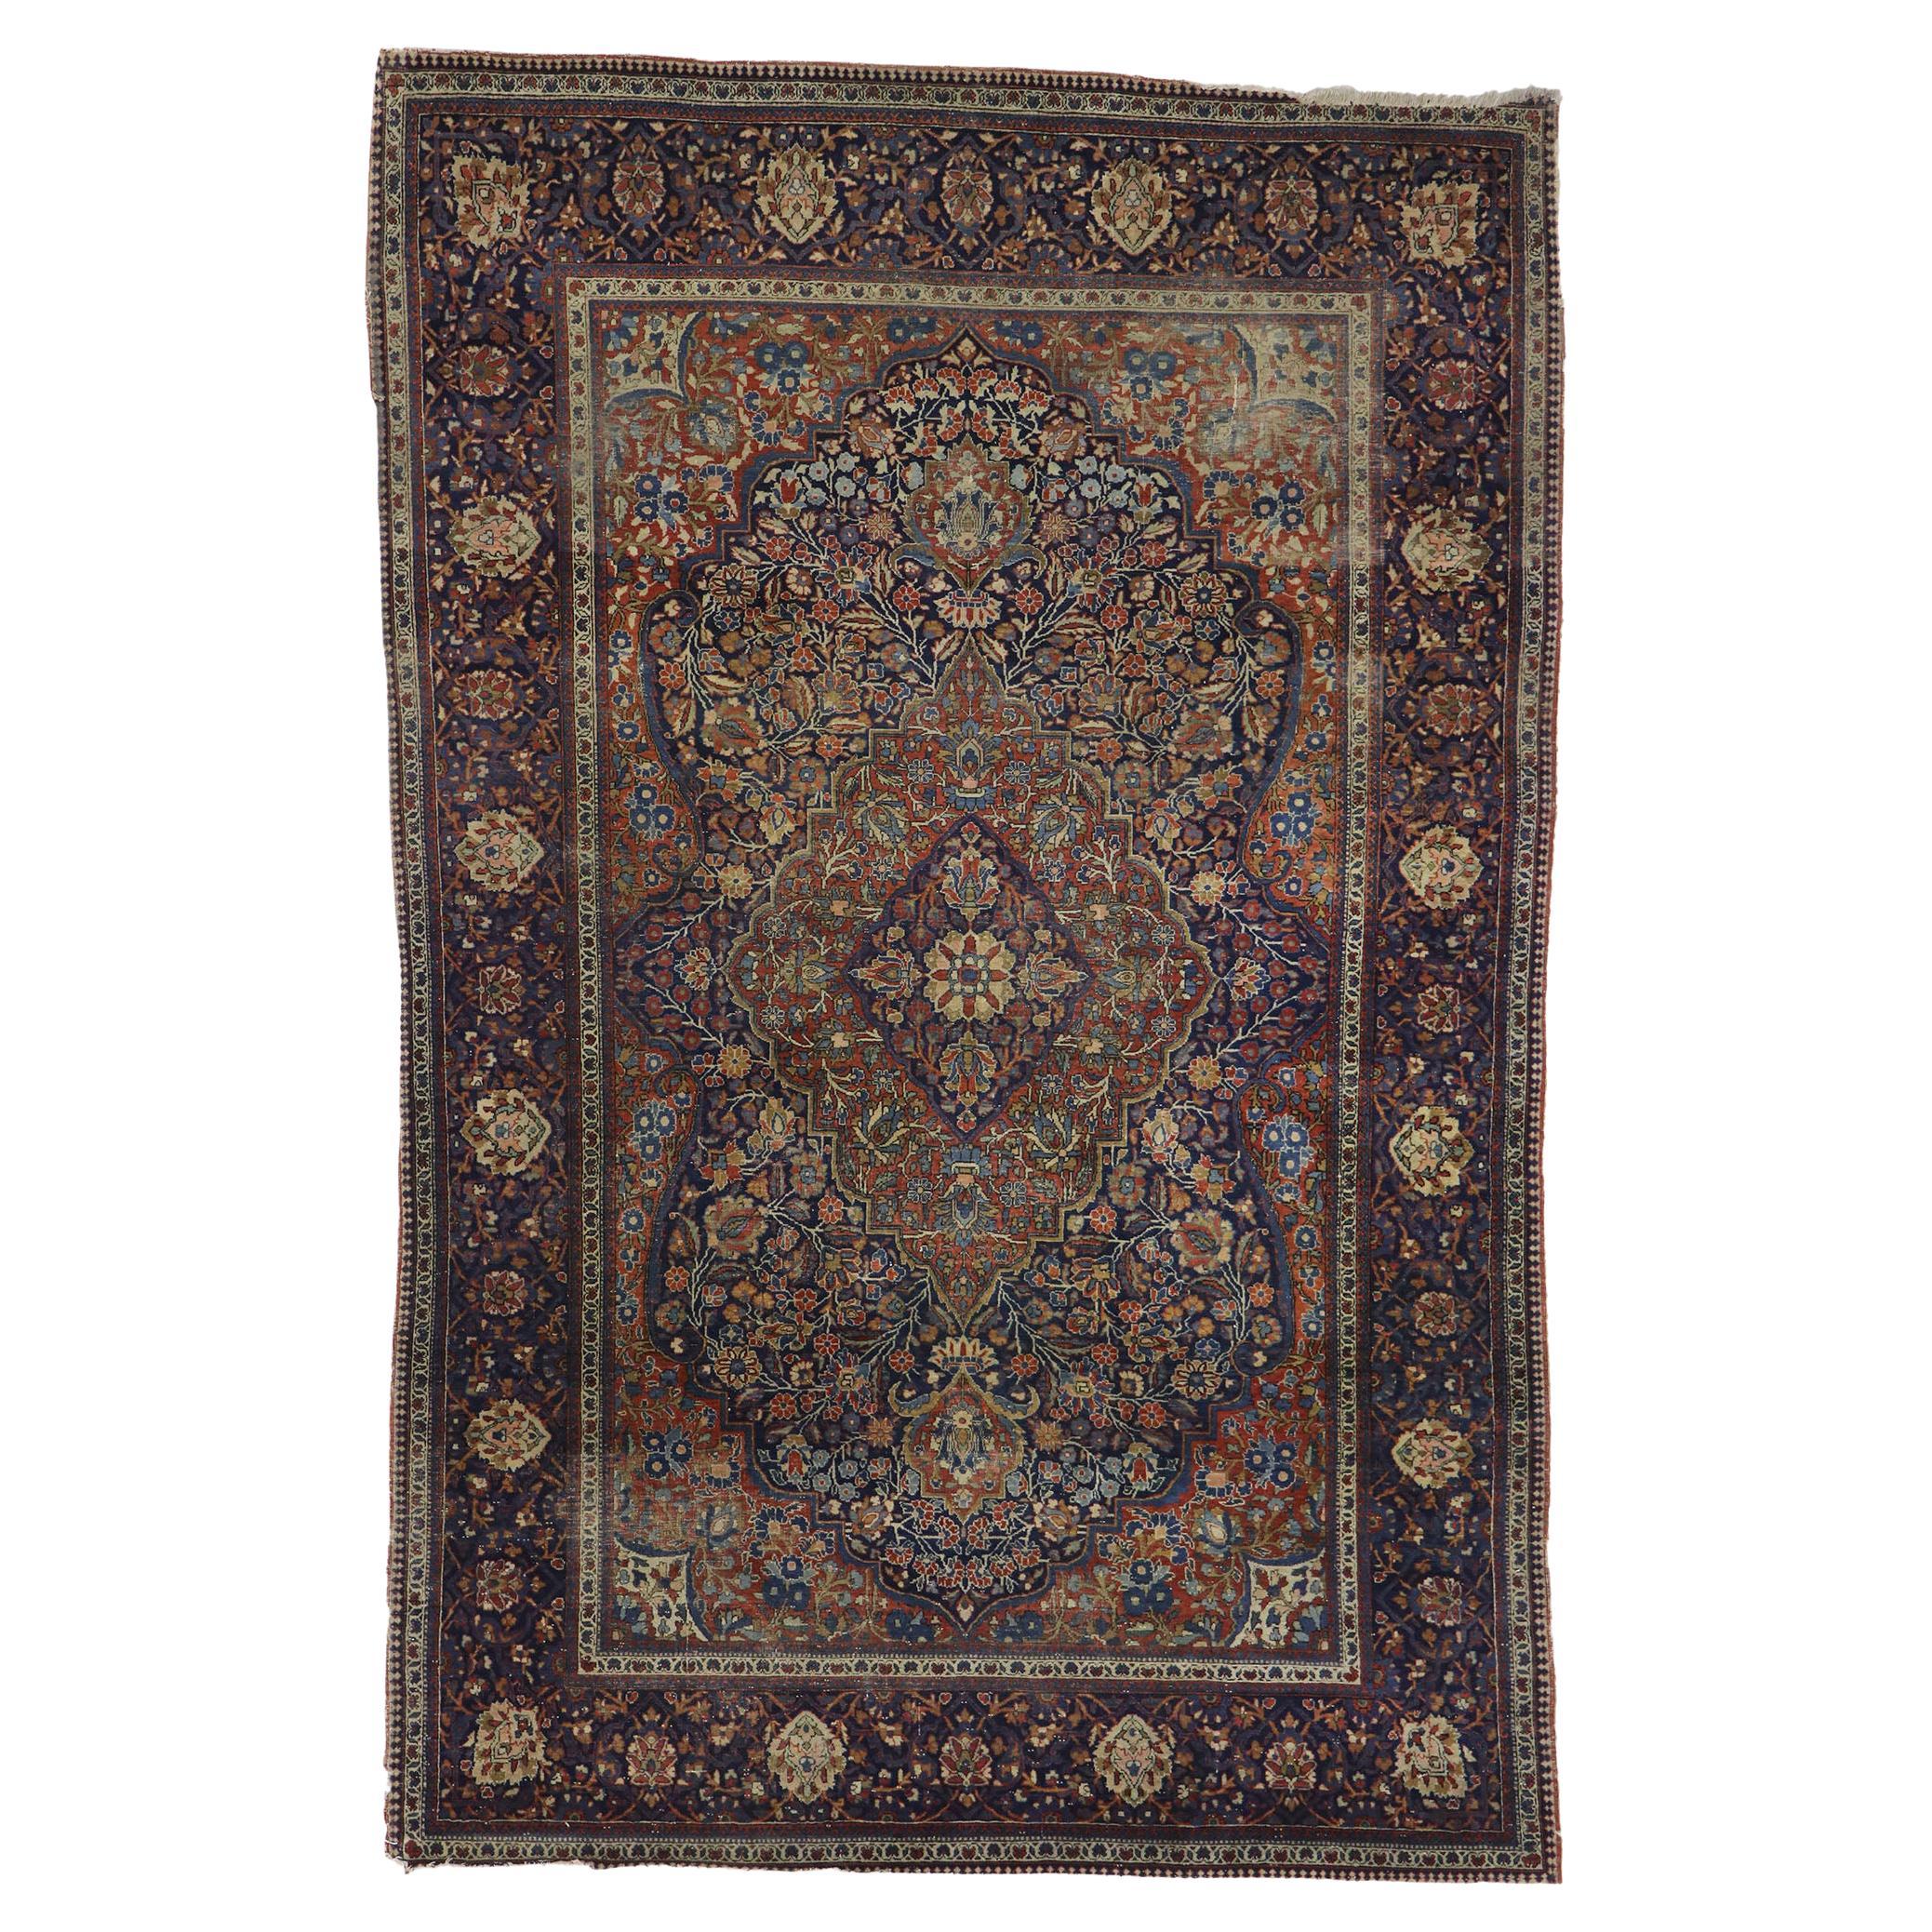 Antique Persian Kashan Rug, Austere Elegance Meets Relaxed Familiarity